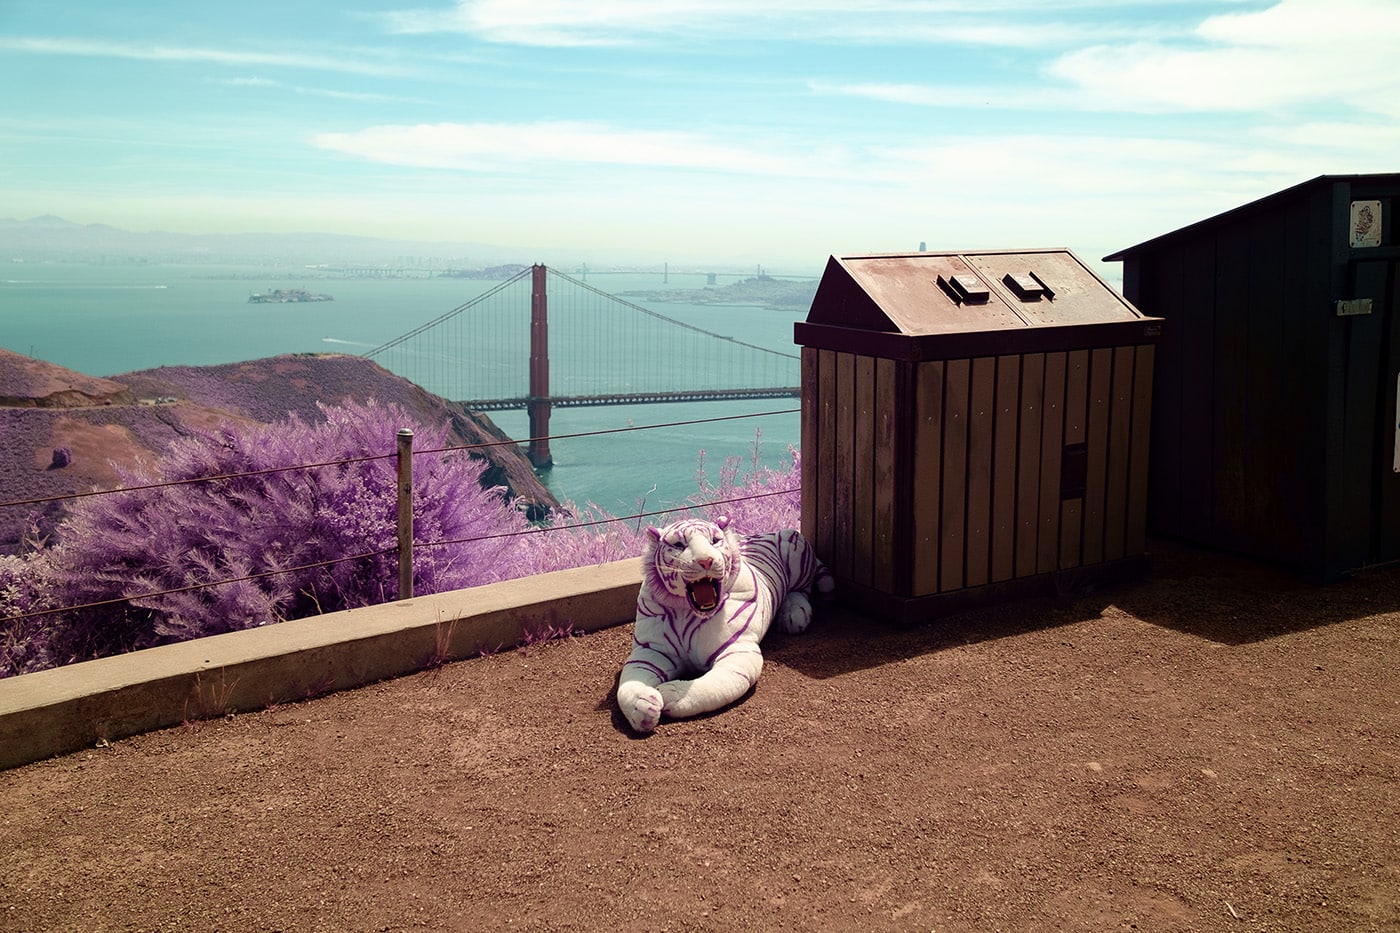 Stuffed Tiger Sitting Next To A Trash Can Above The Golden Gate Bridge.